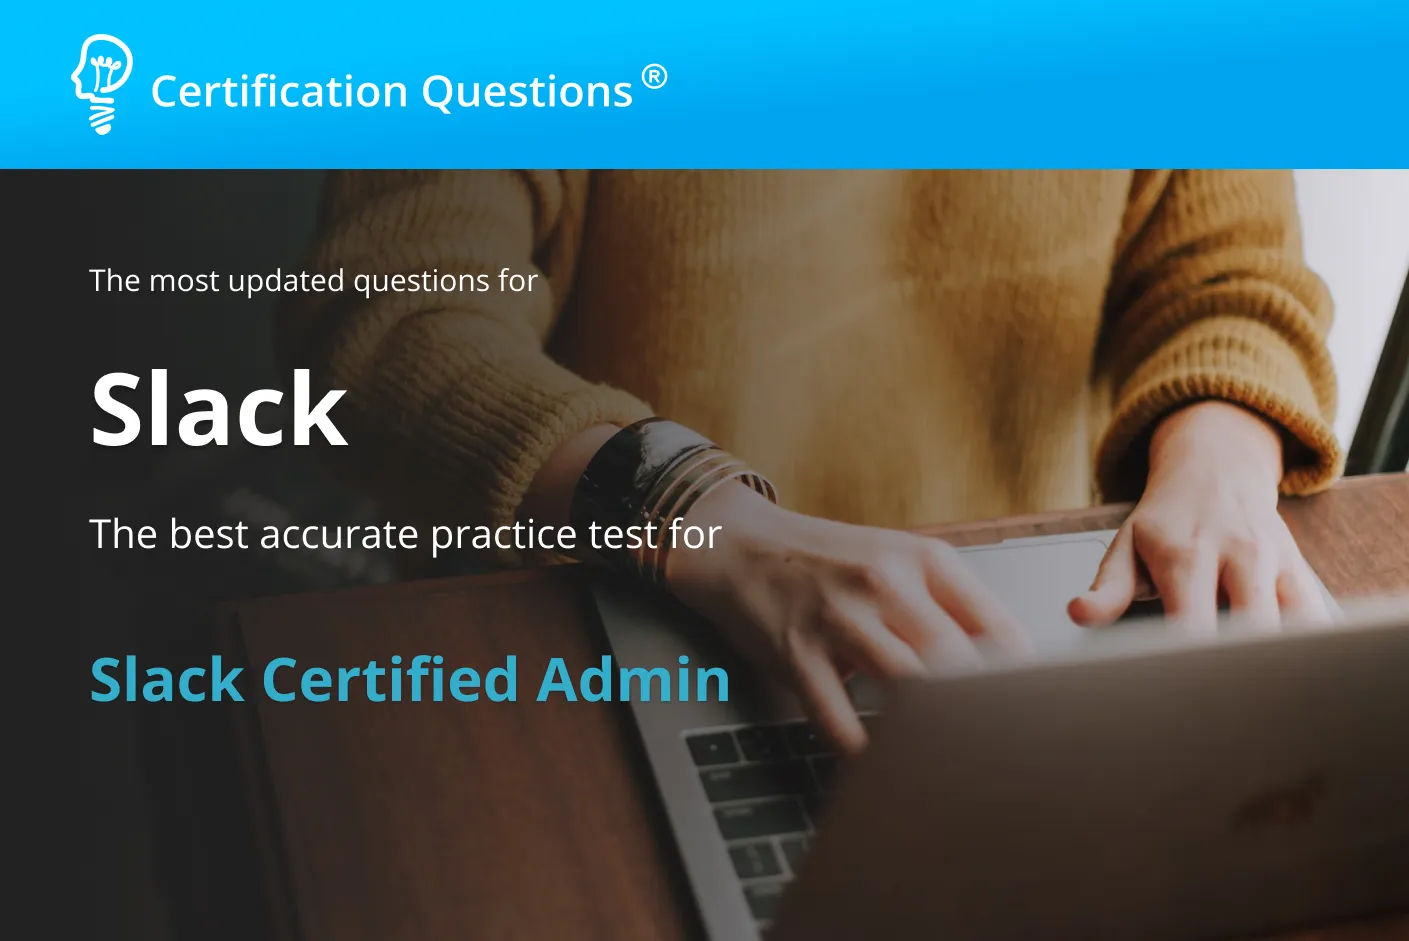 Here is the image for the slack certified admin exam questions in the United States of America.